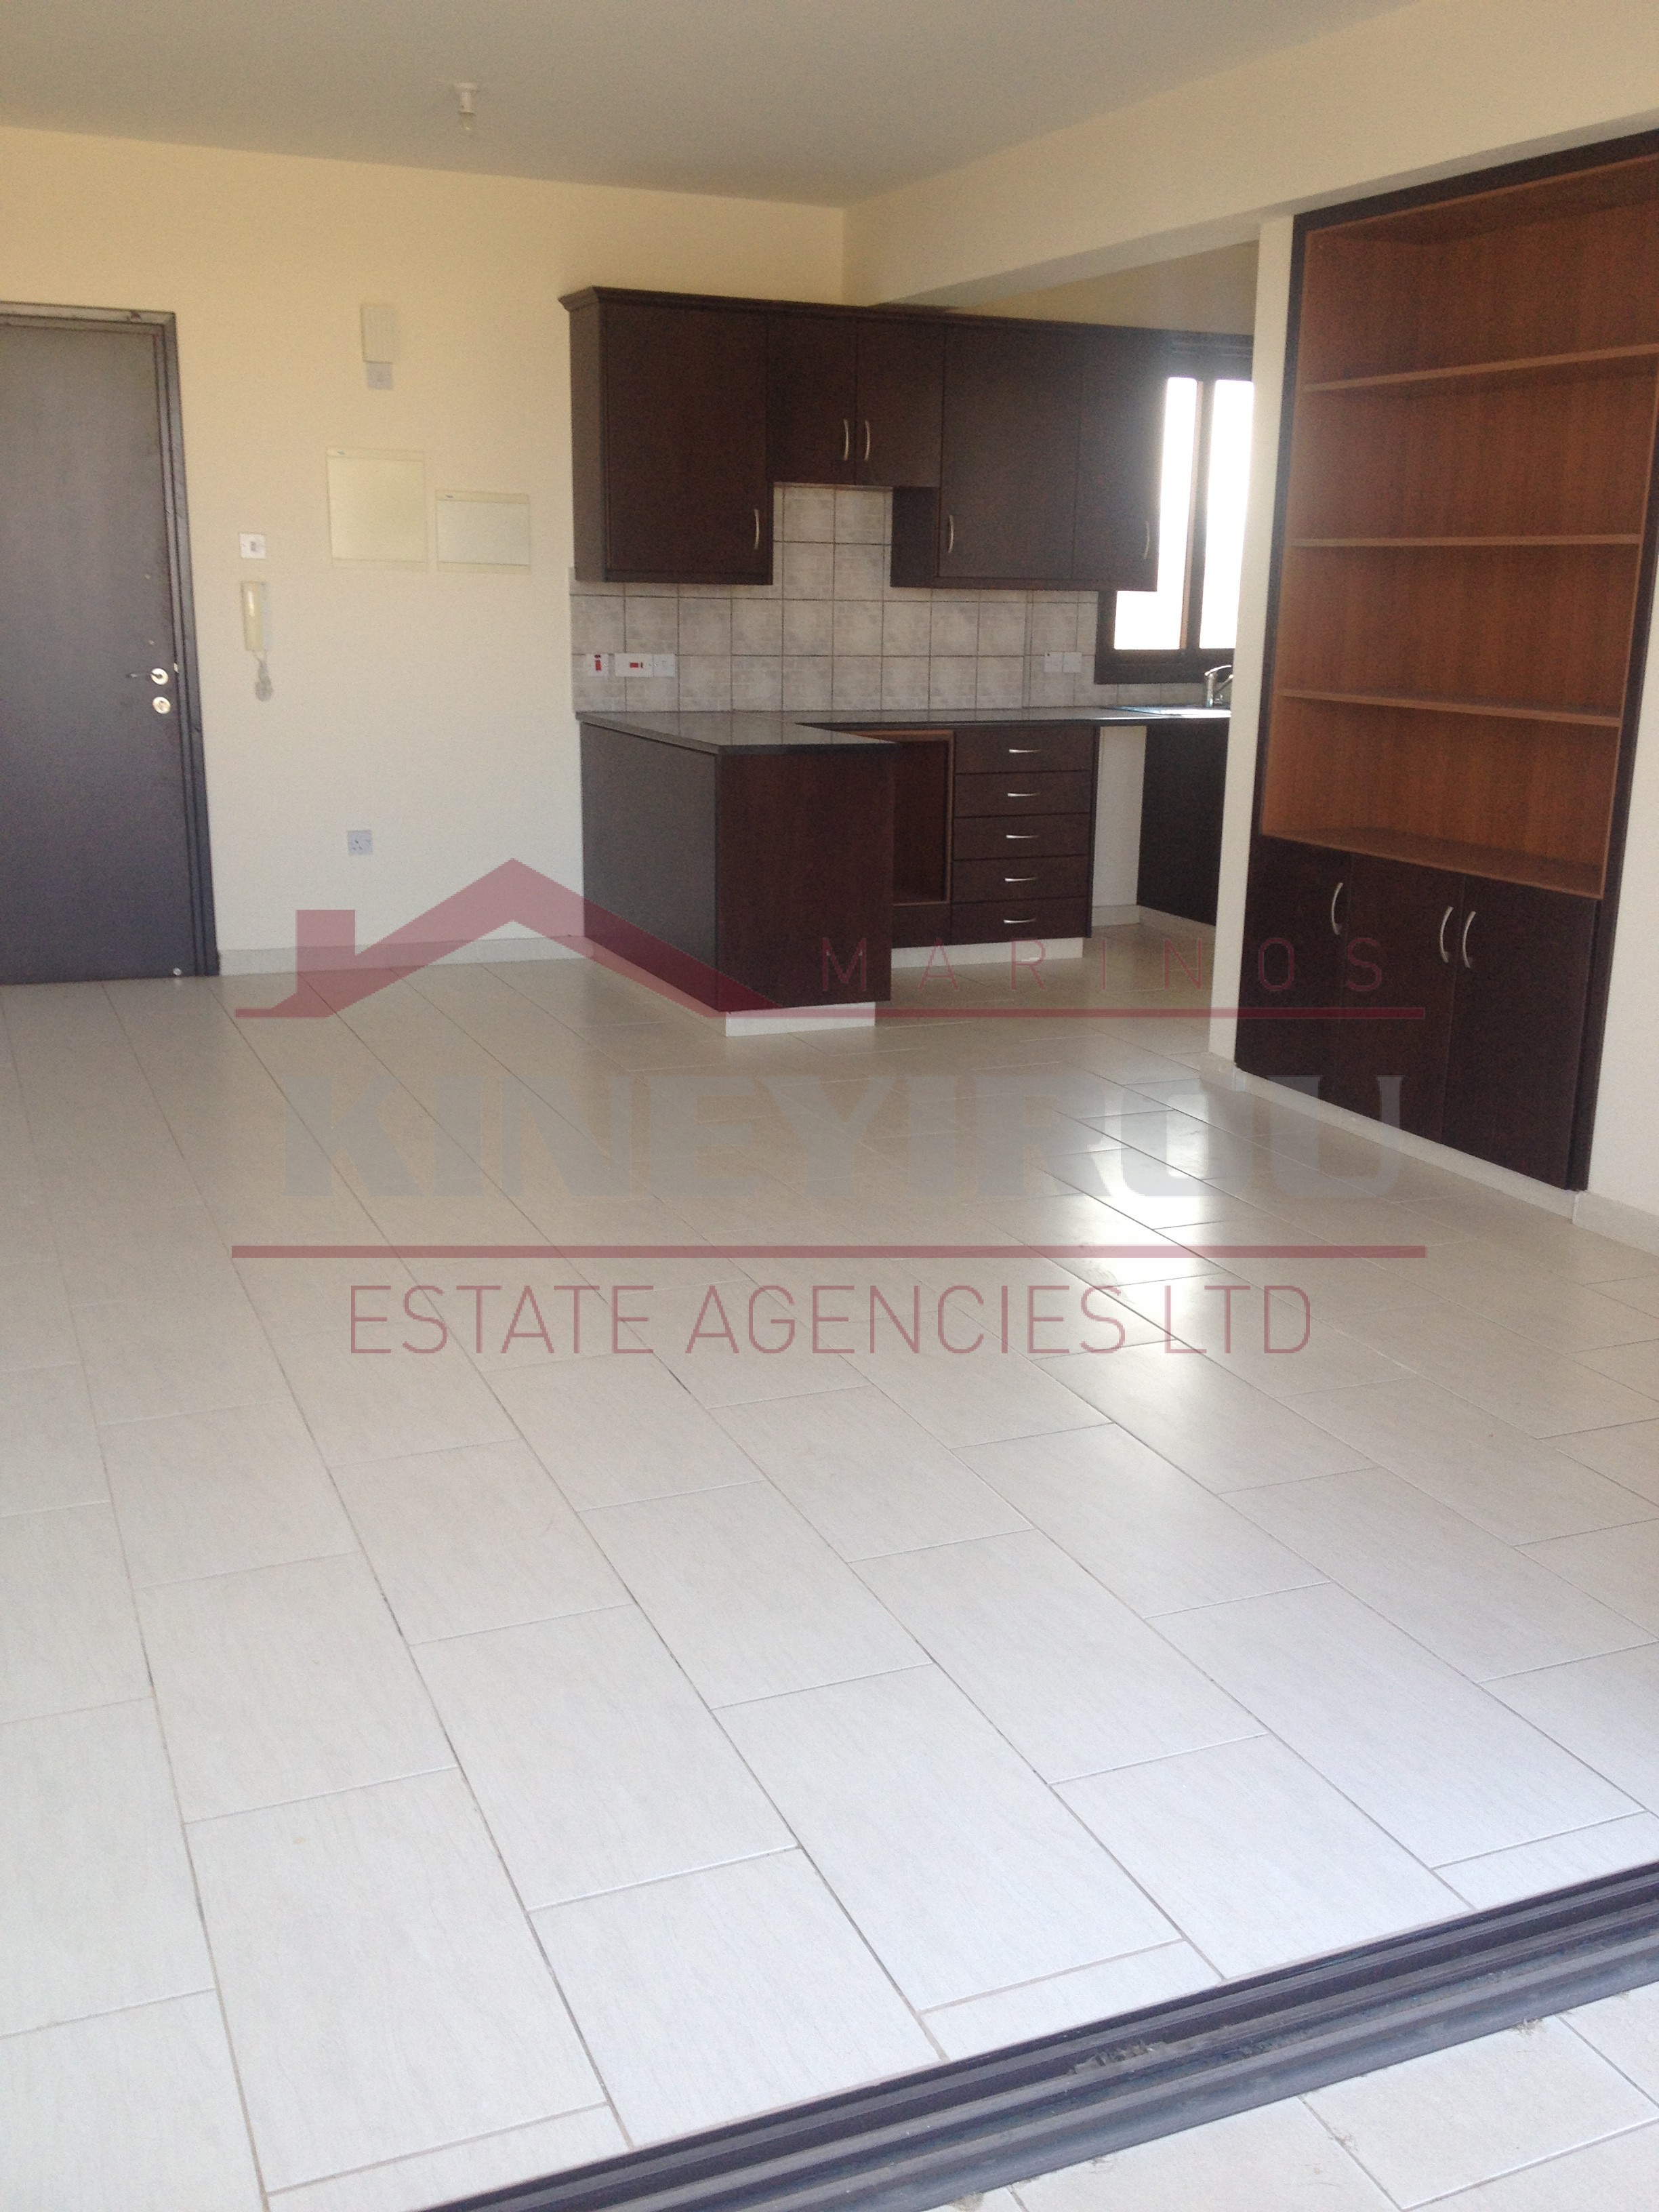 For Sale 3 Bedroom Pent House Apartment in Kamares, Larnaca